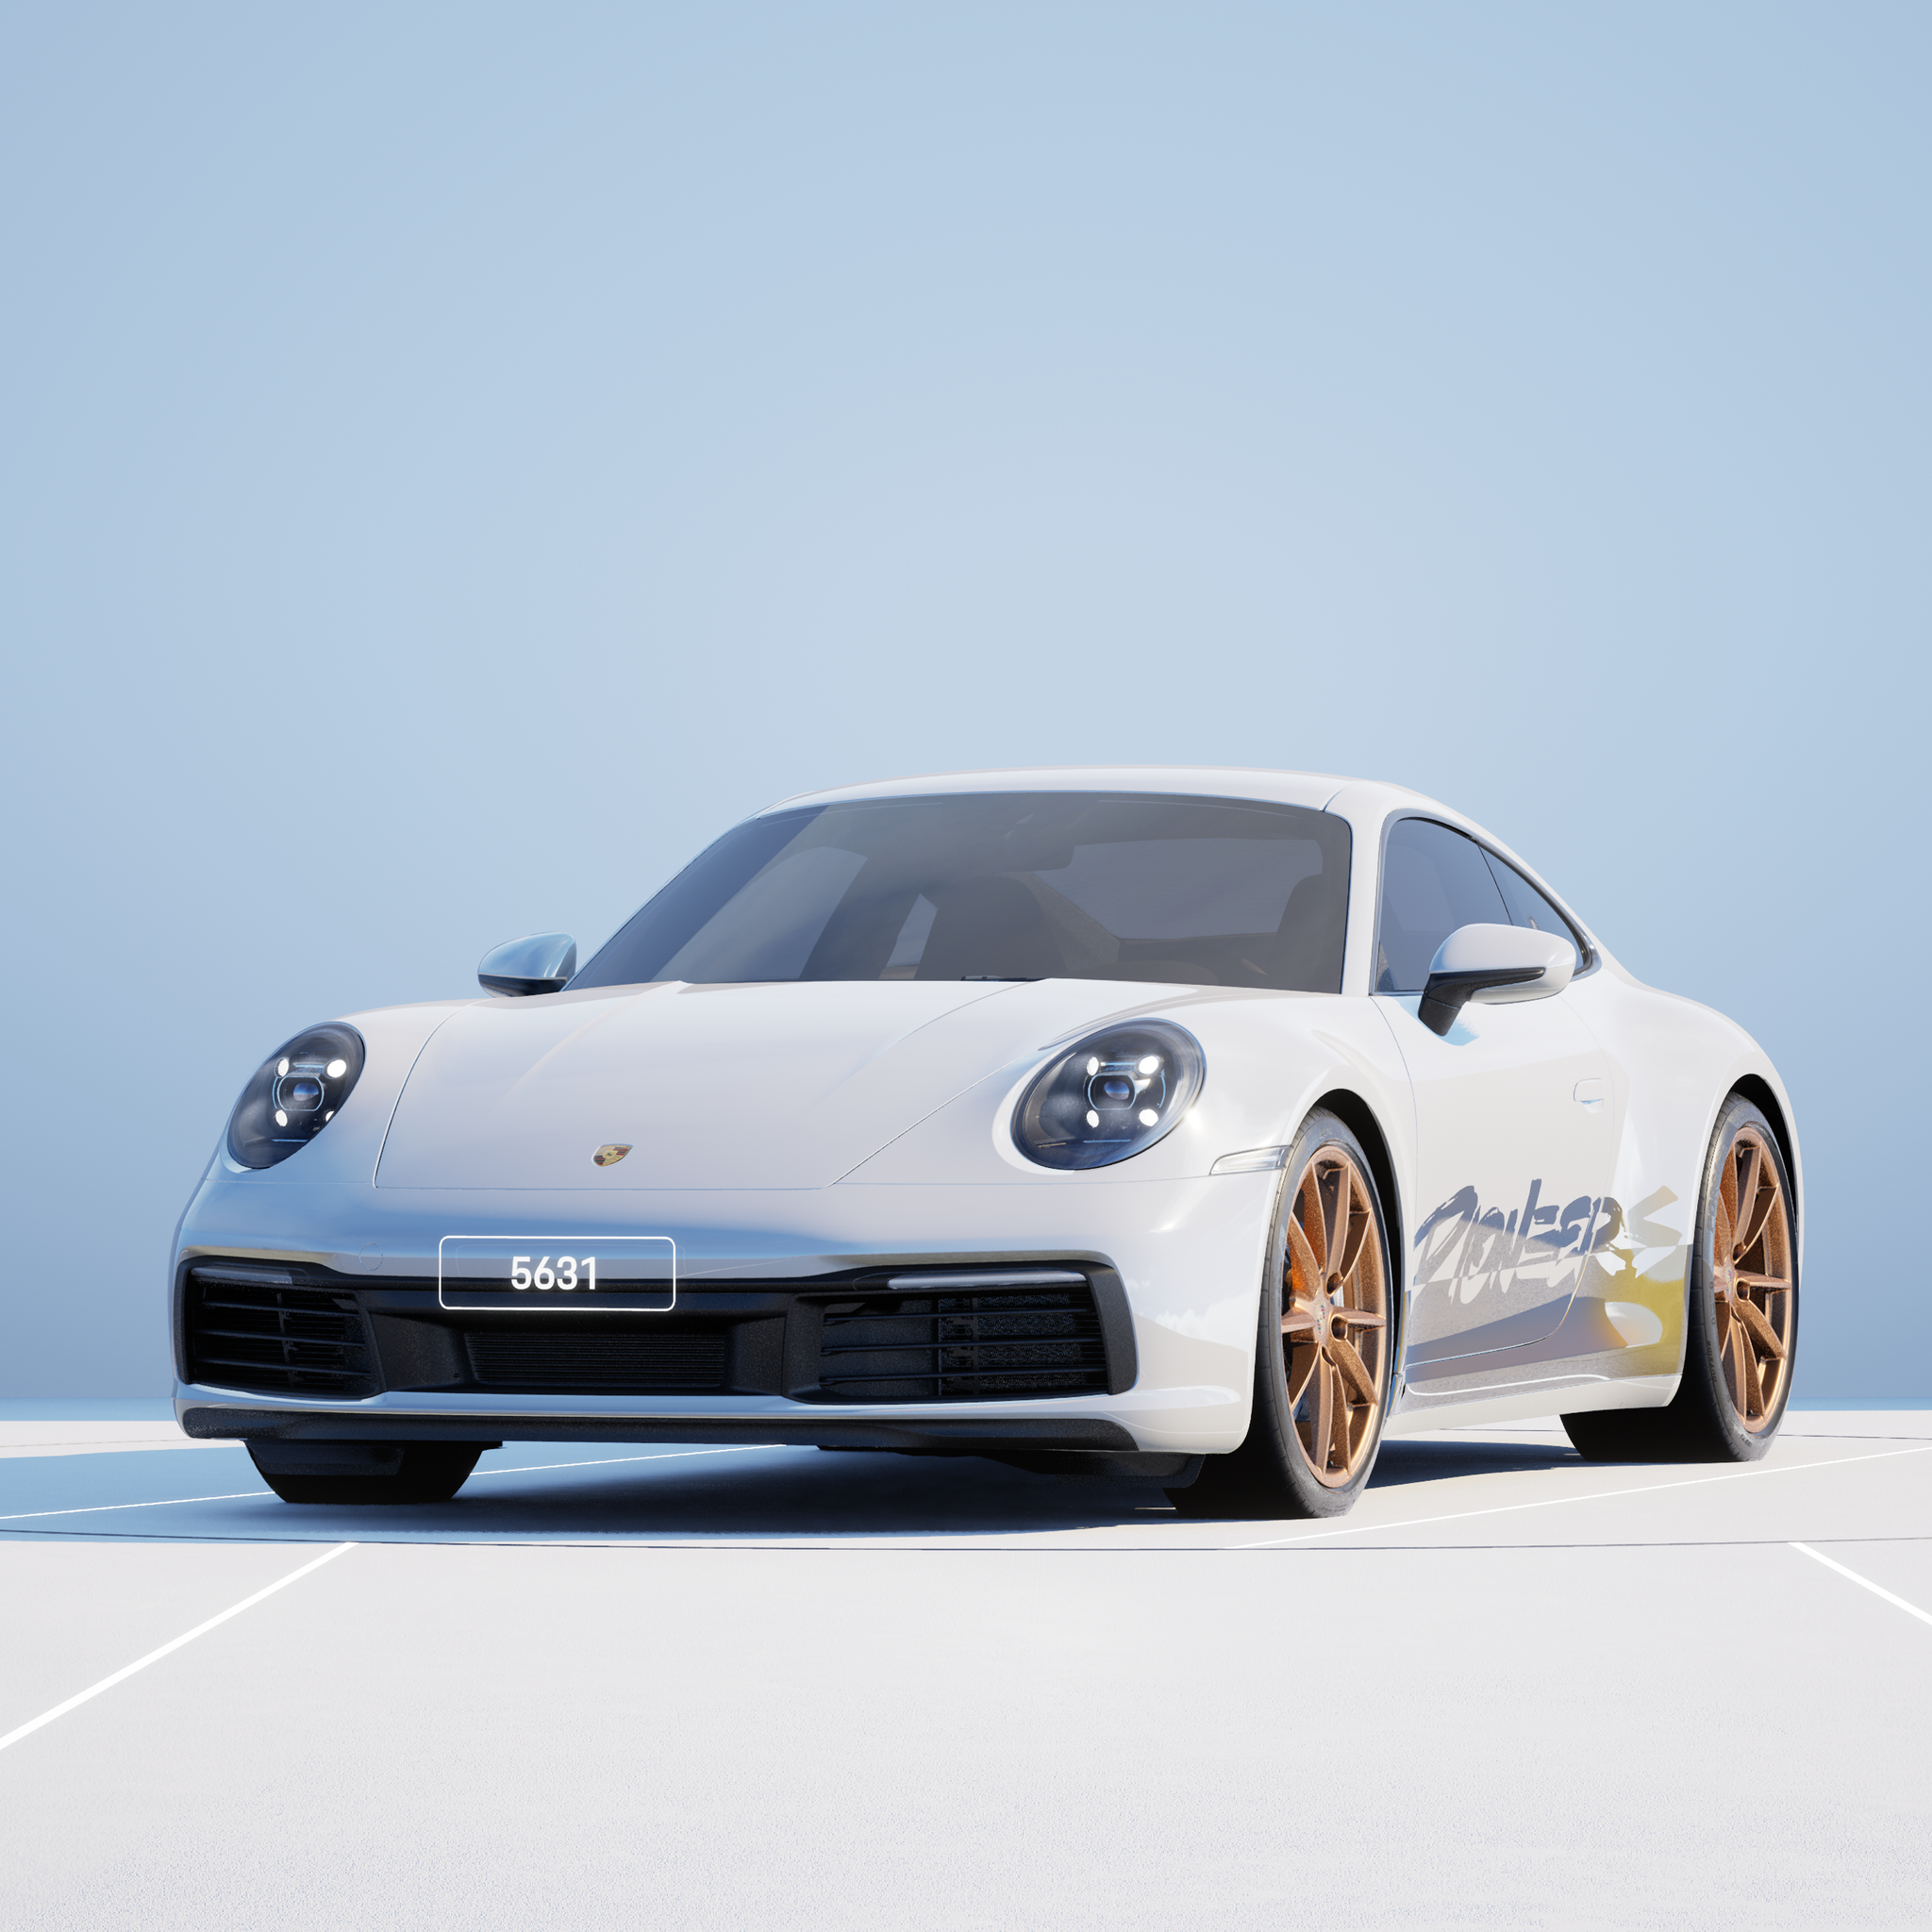 The PORSCHΞ 911 5631 image in phase